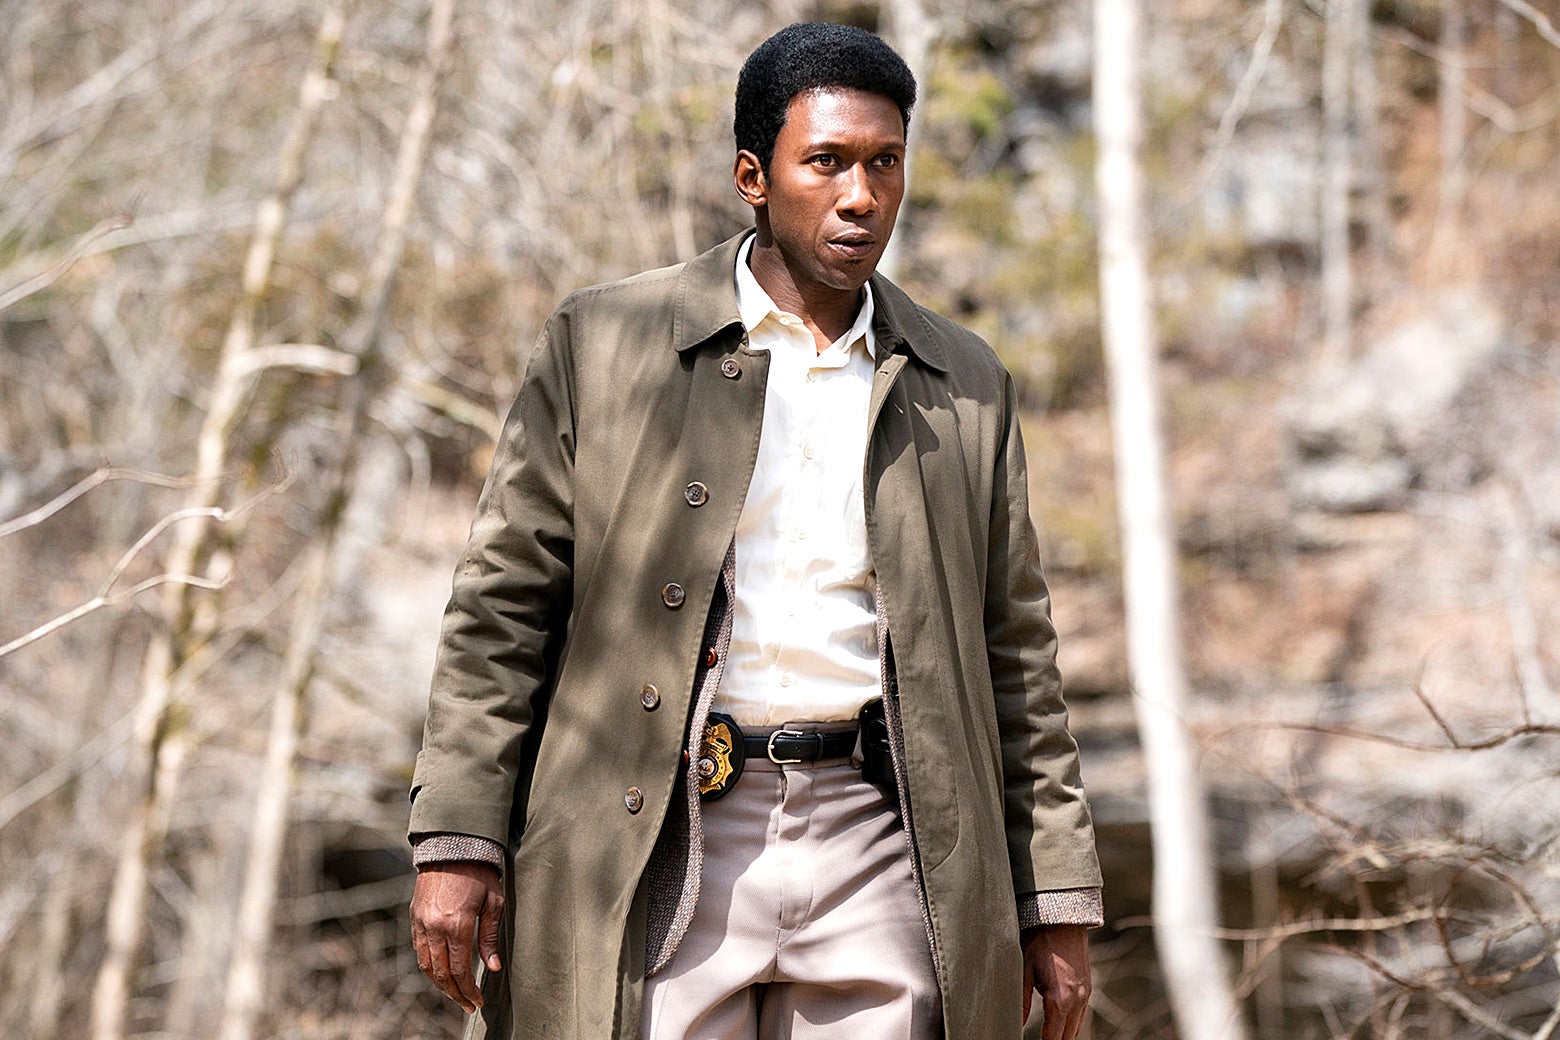 Mahershala Ali as Detective Wayne Hays, wearing a trenchcoat and walking in the woods.